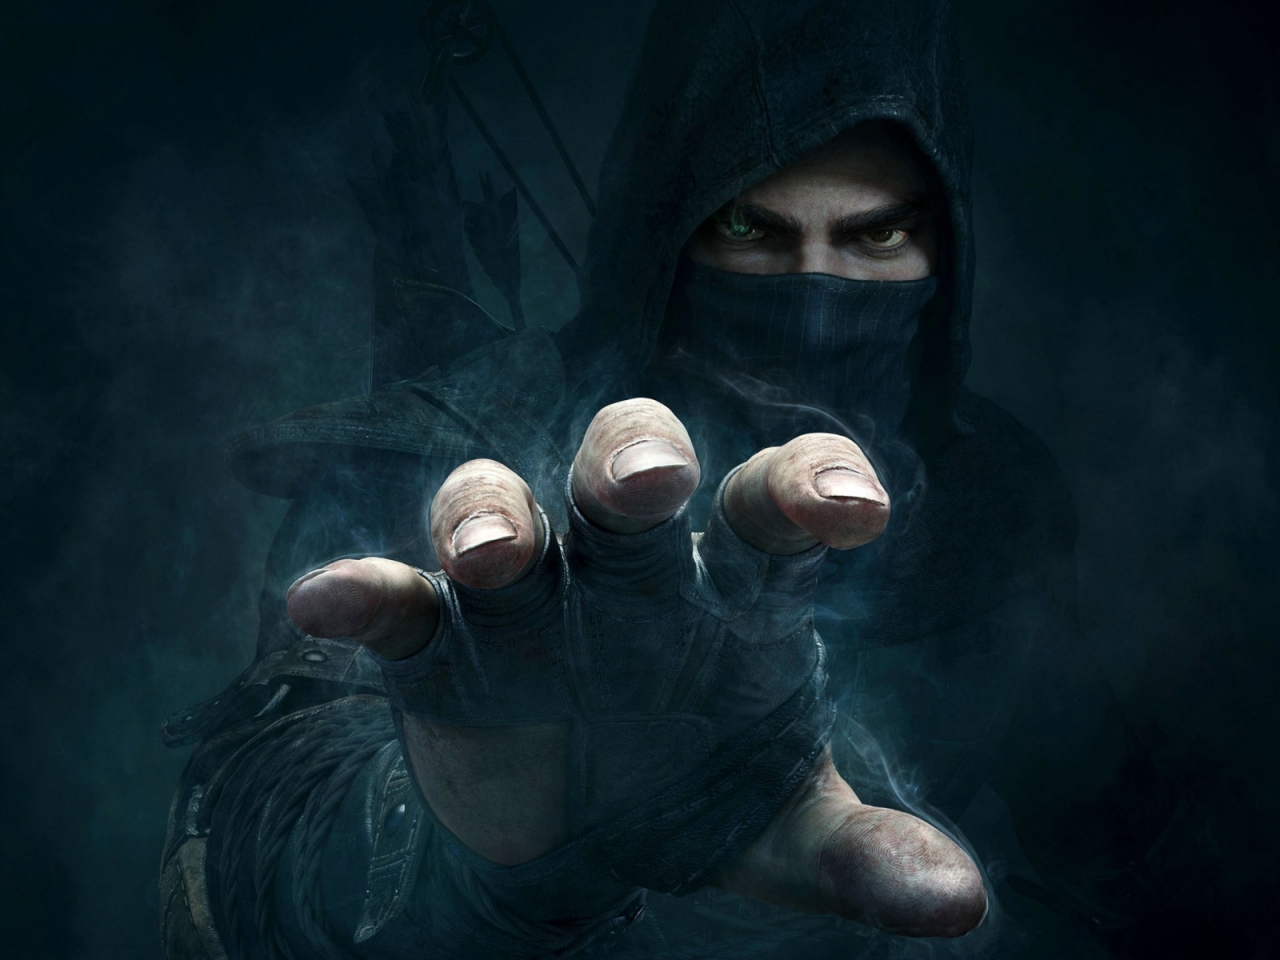 Thief Video Game for 1280 x 960 resolution